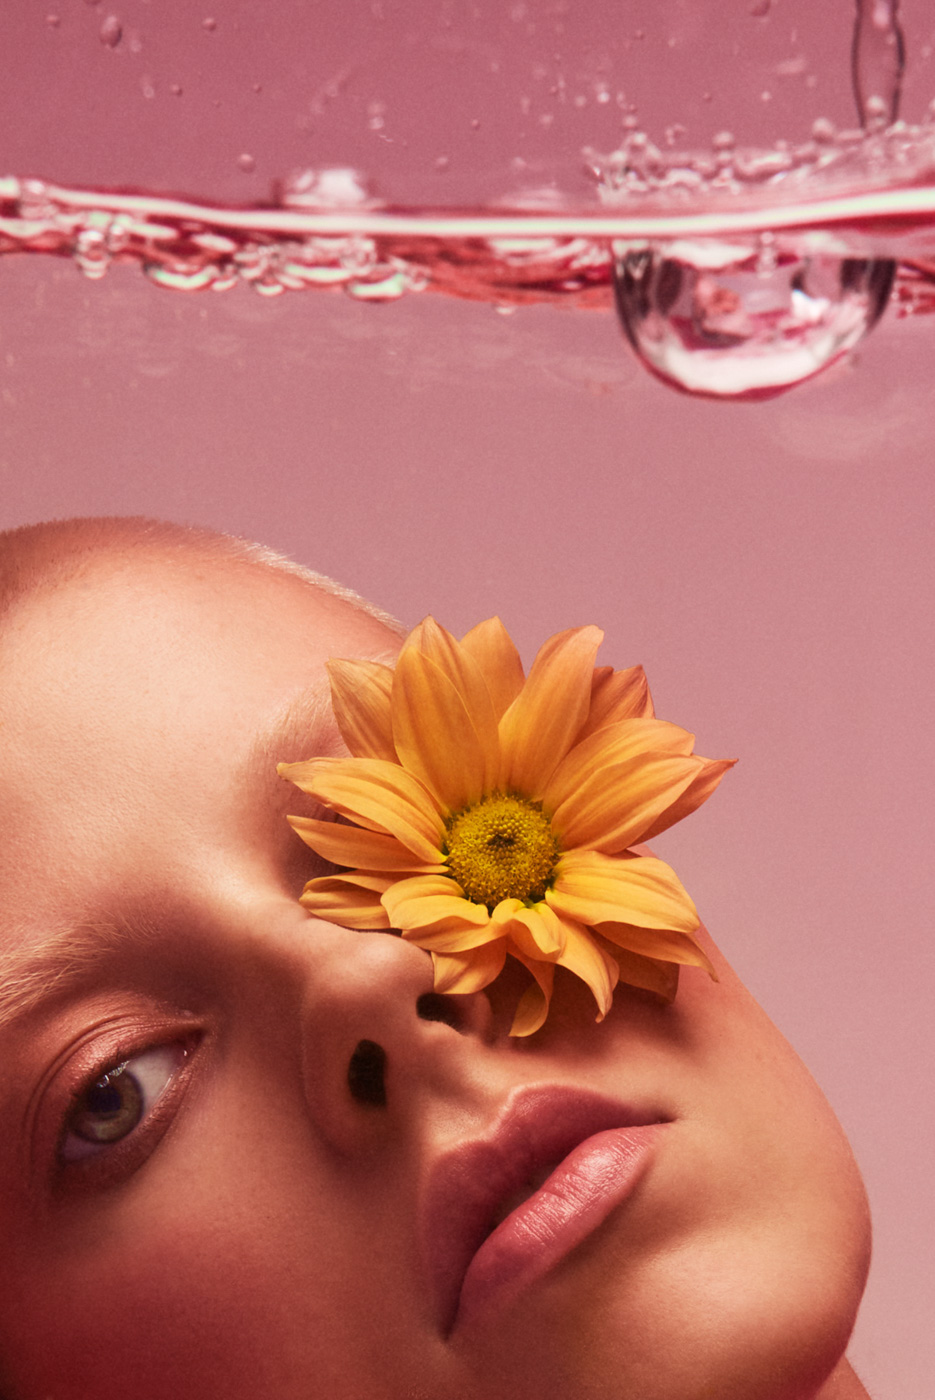 Short_haired_blond_woman_with_yellow_flower_under_water_on_pink_background_photographed_by_Sara_Lehtomaa